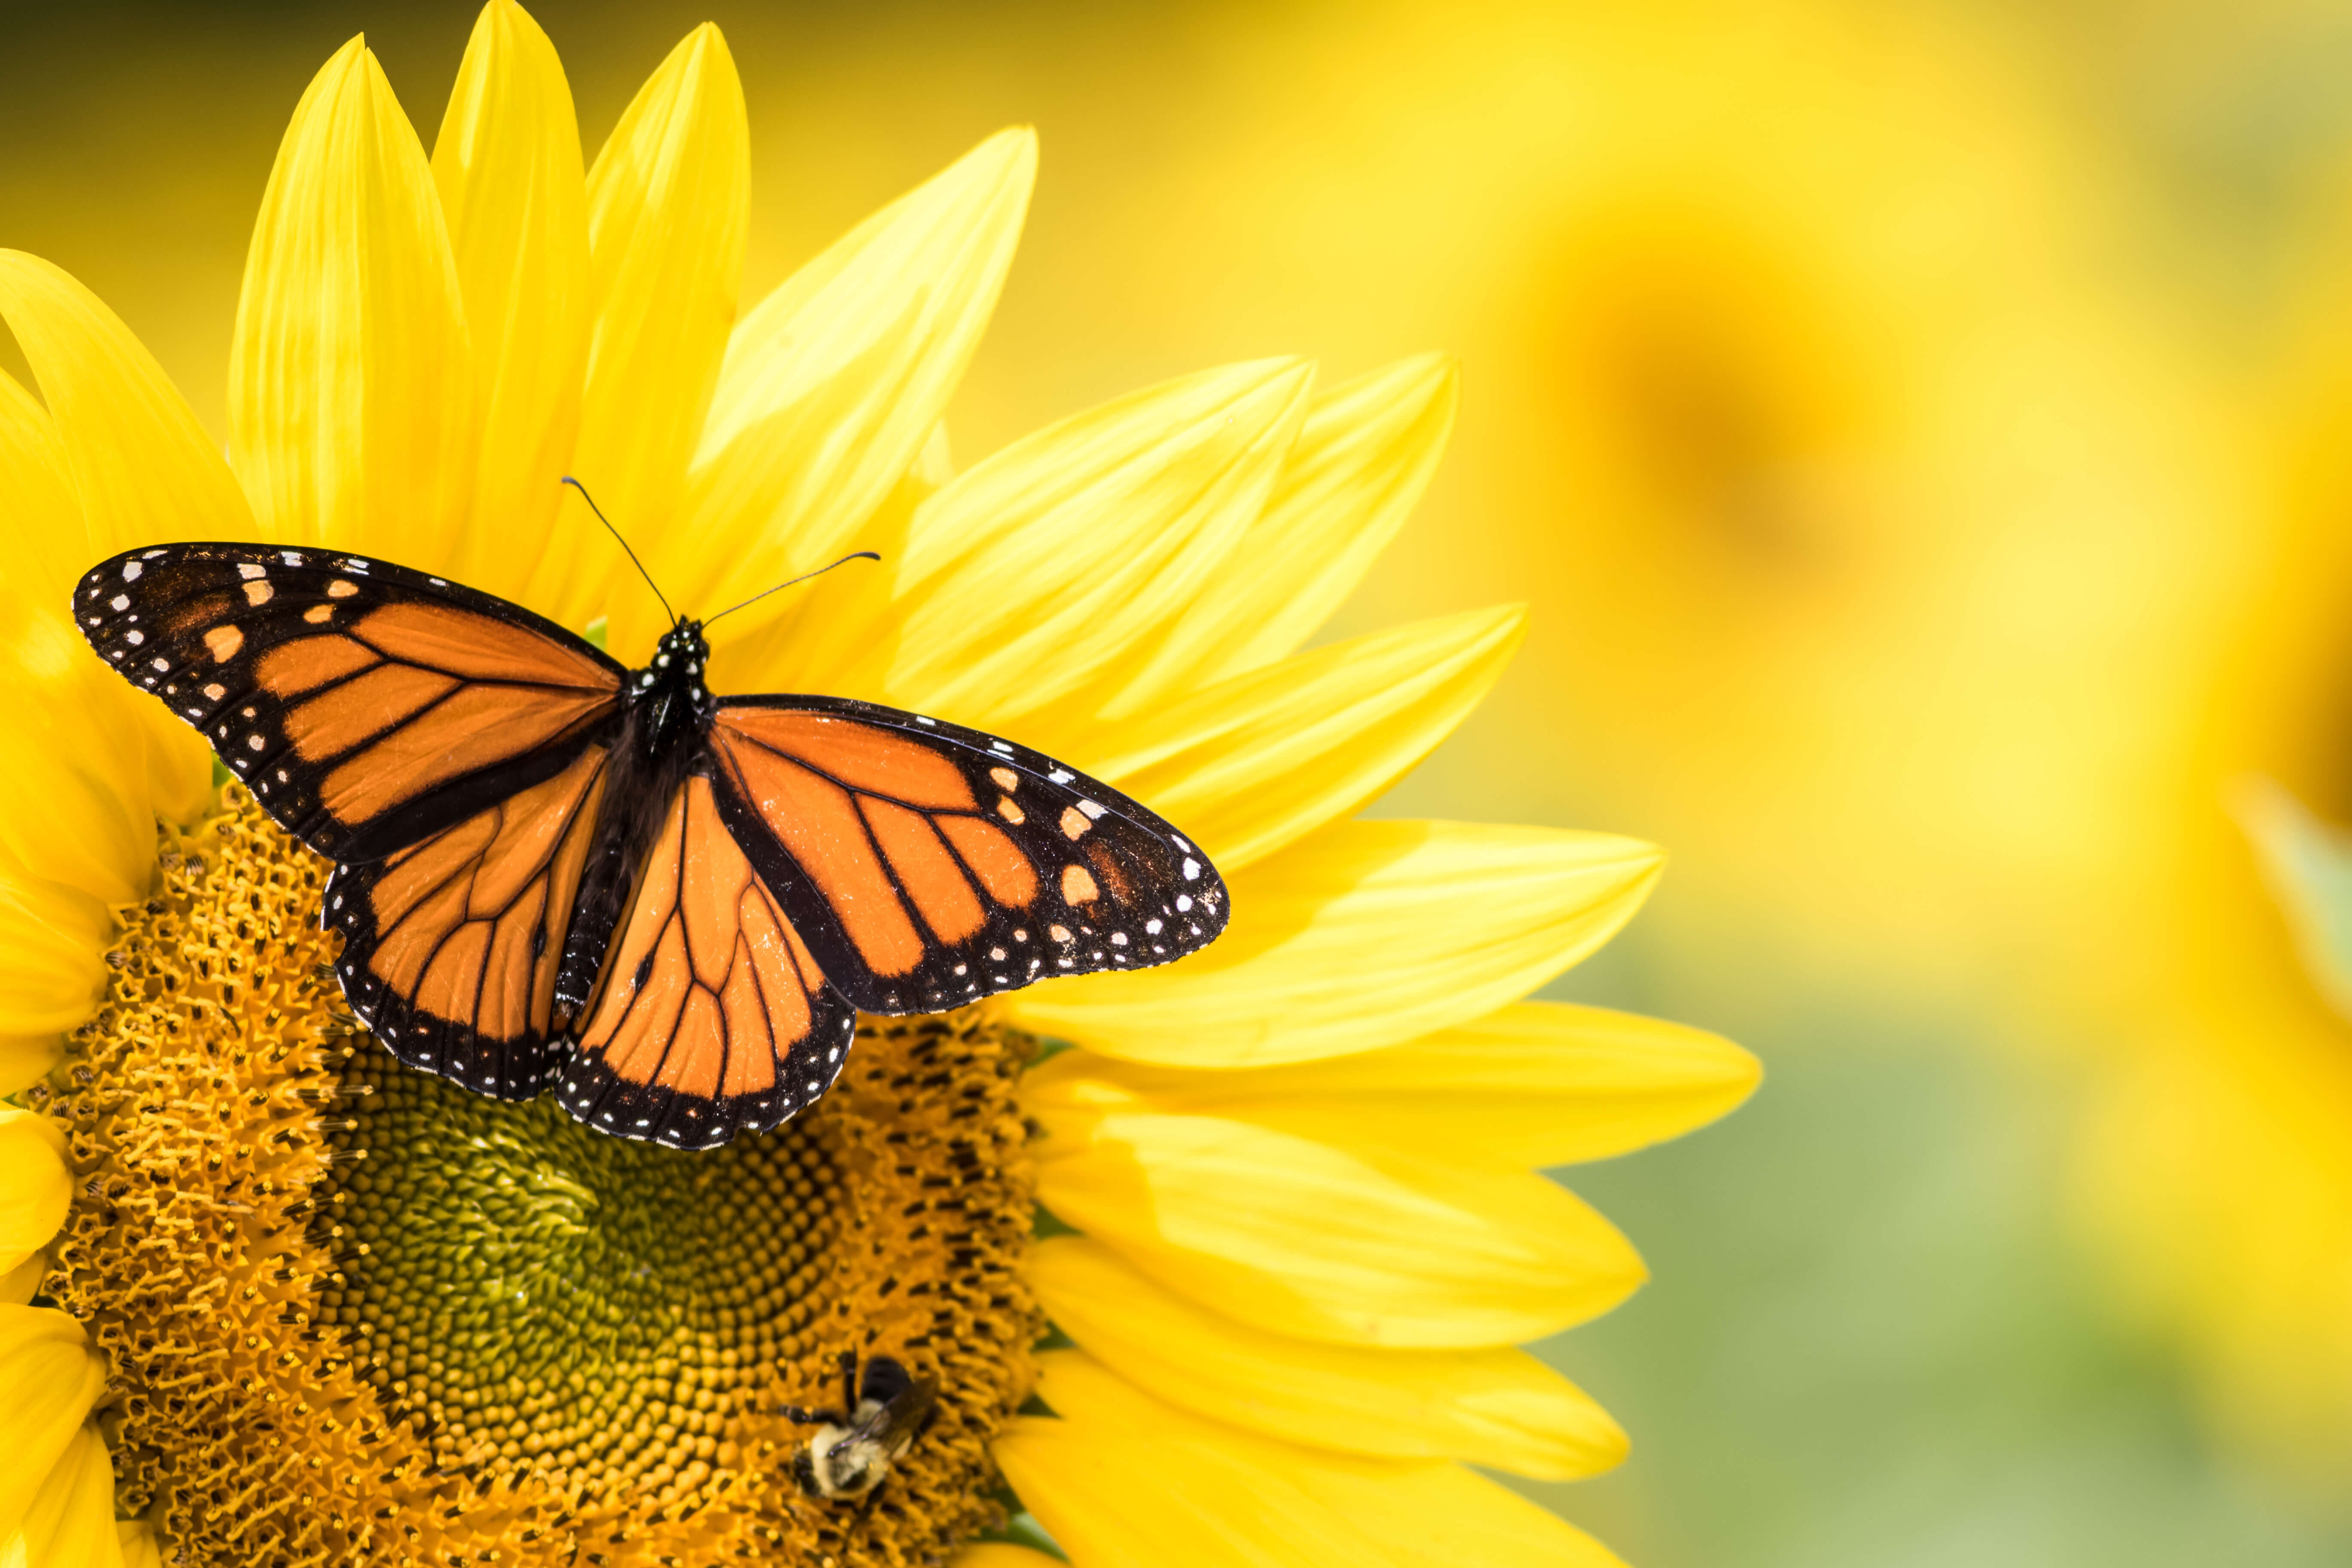 monarch butterfly and a bee rest on a sunflower